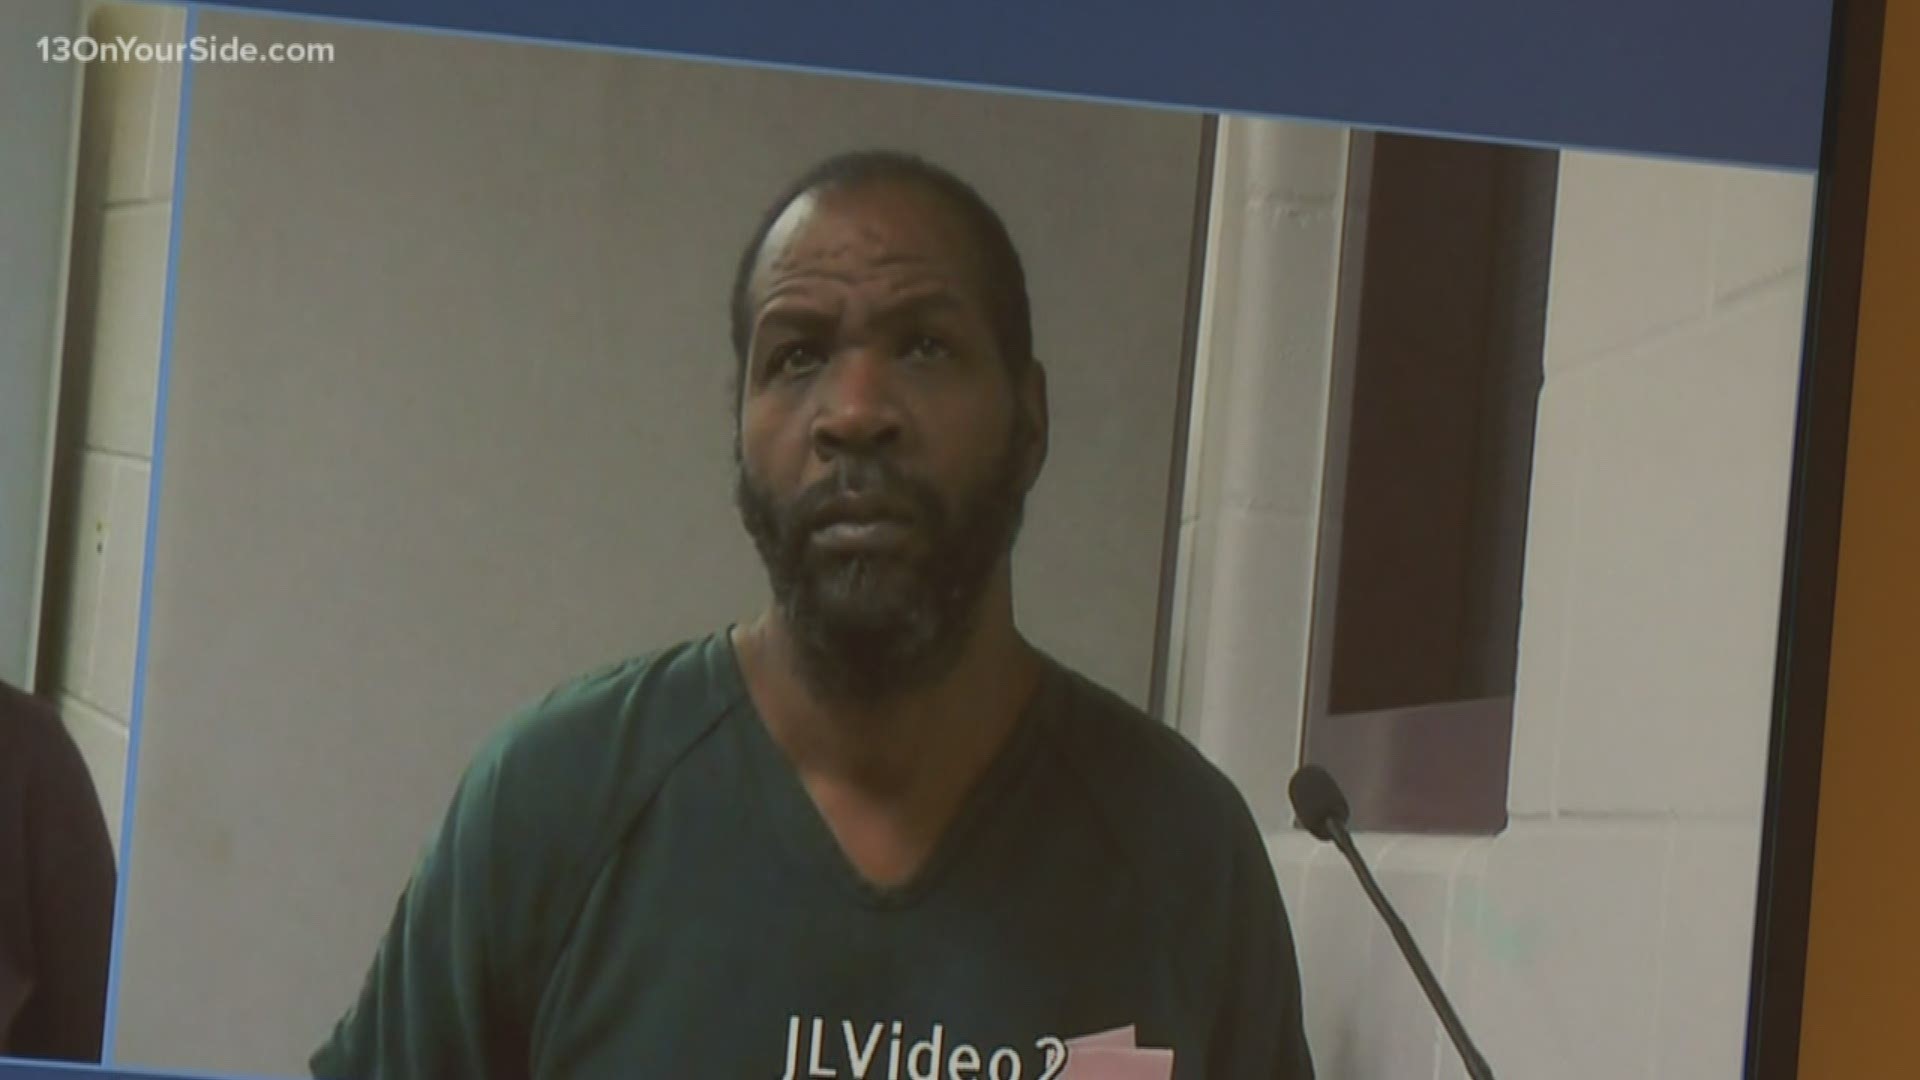 Lamont C. Plair has numerous felony convictions, including one for raping an incapacitated victim not far from where Sunday's deadly stabbing occurred.